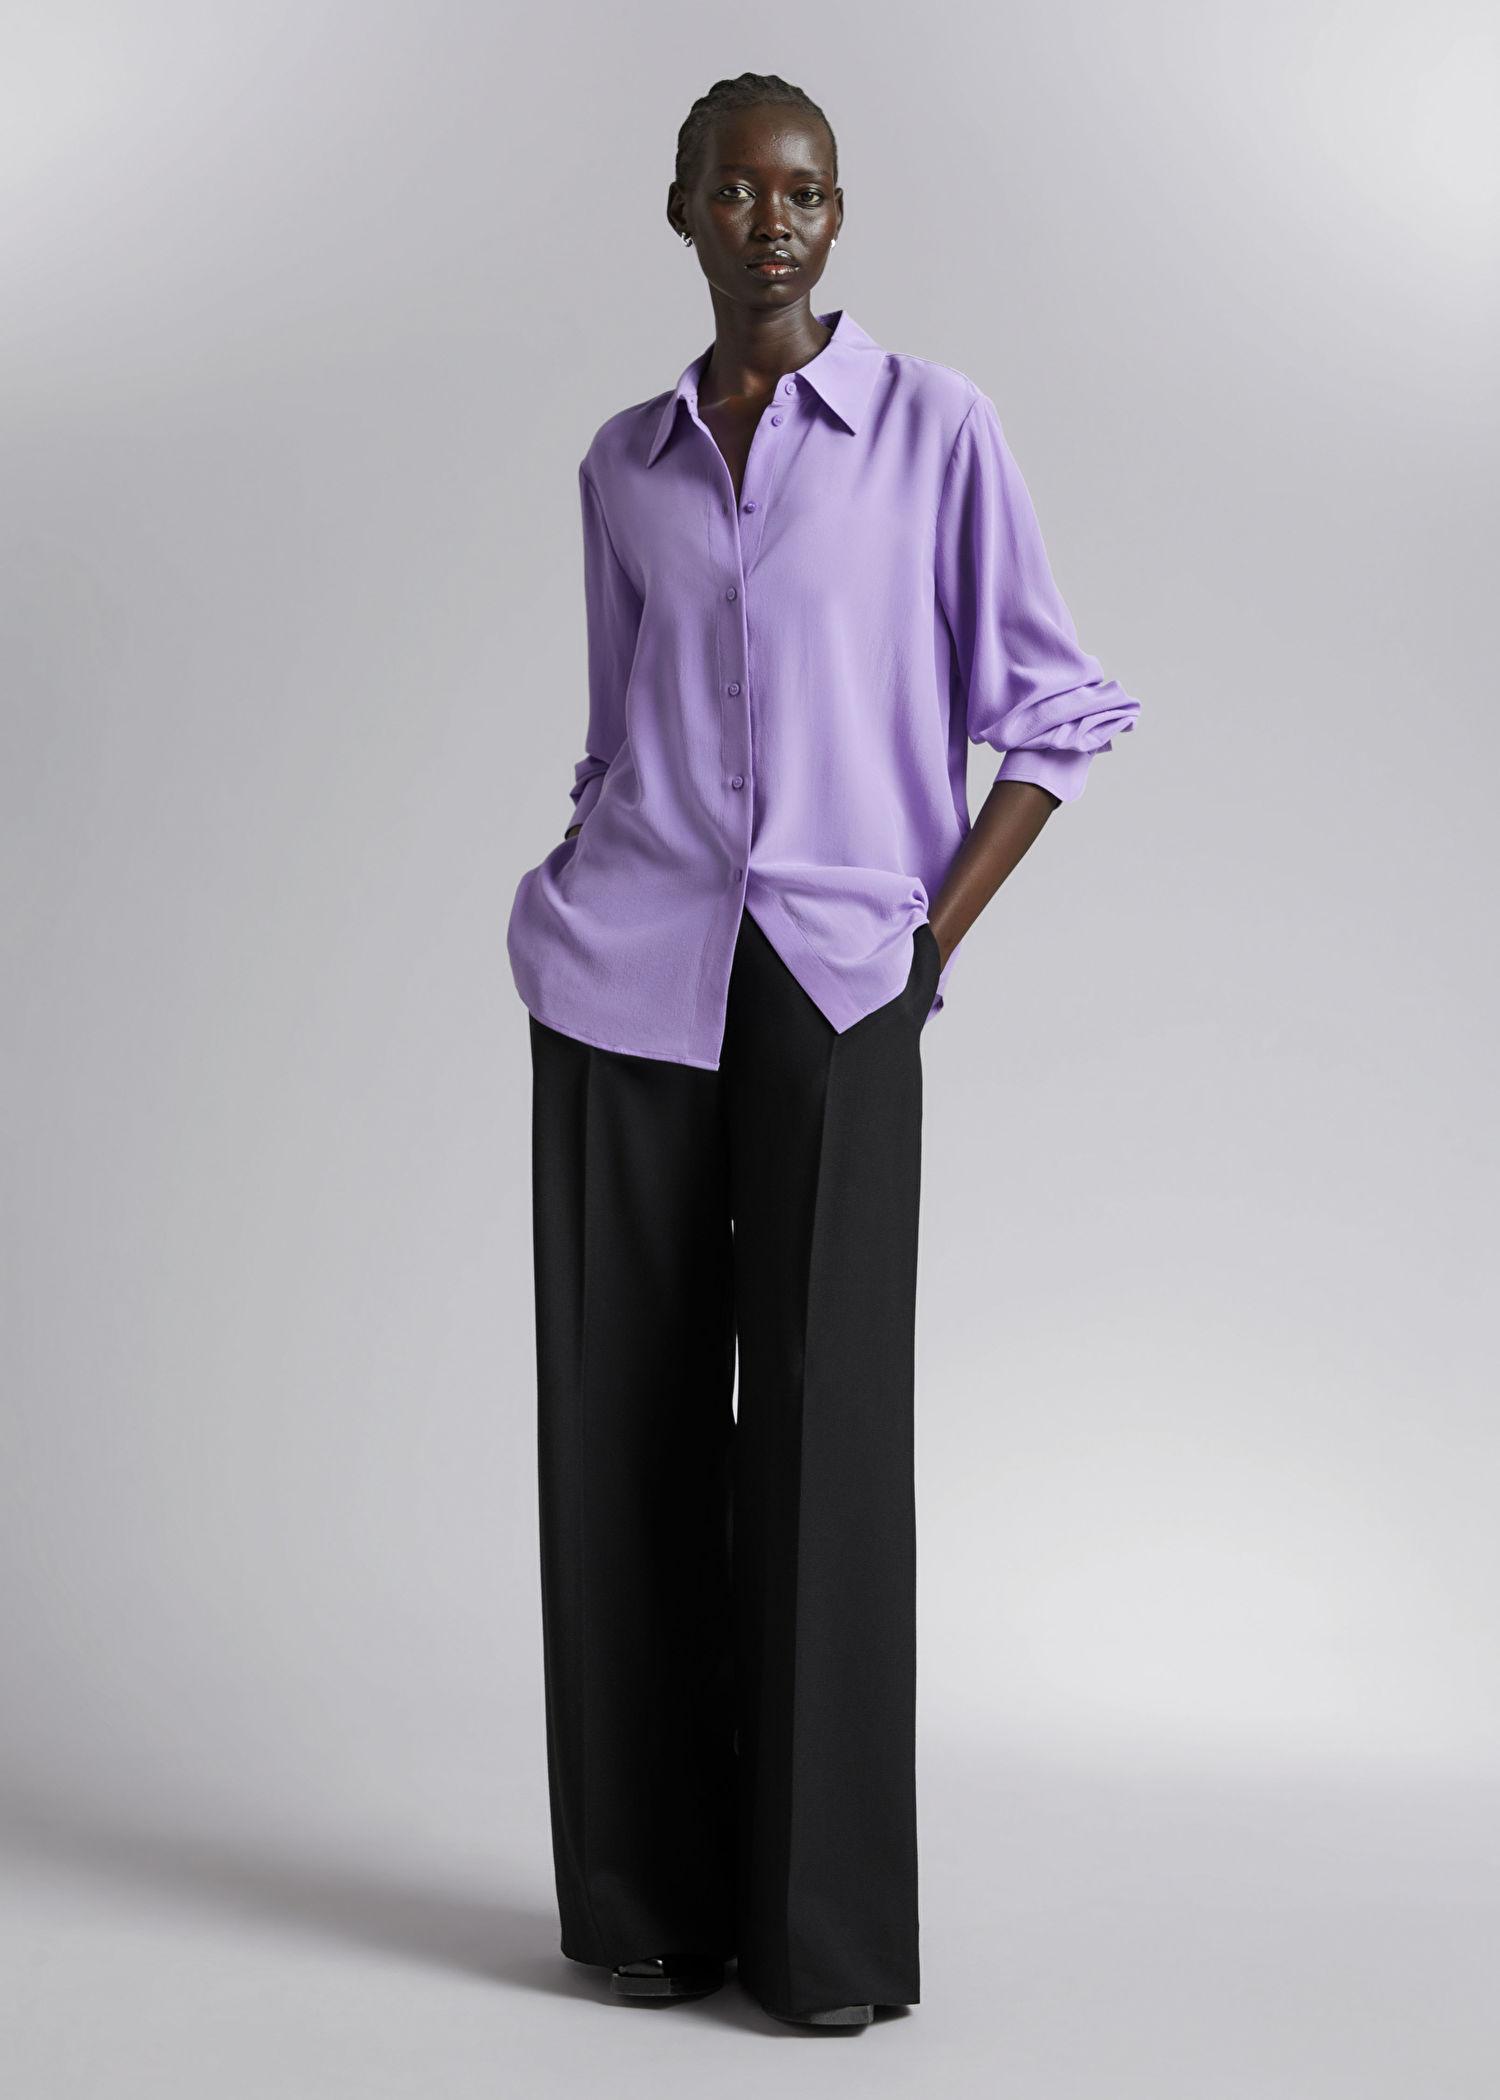 & Other Stories Mulberry Silk Shirt in Purple | Lyst Canada